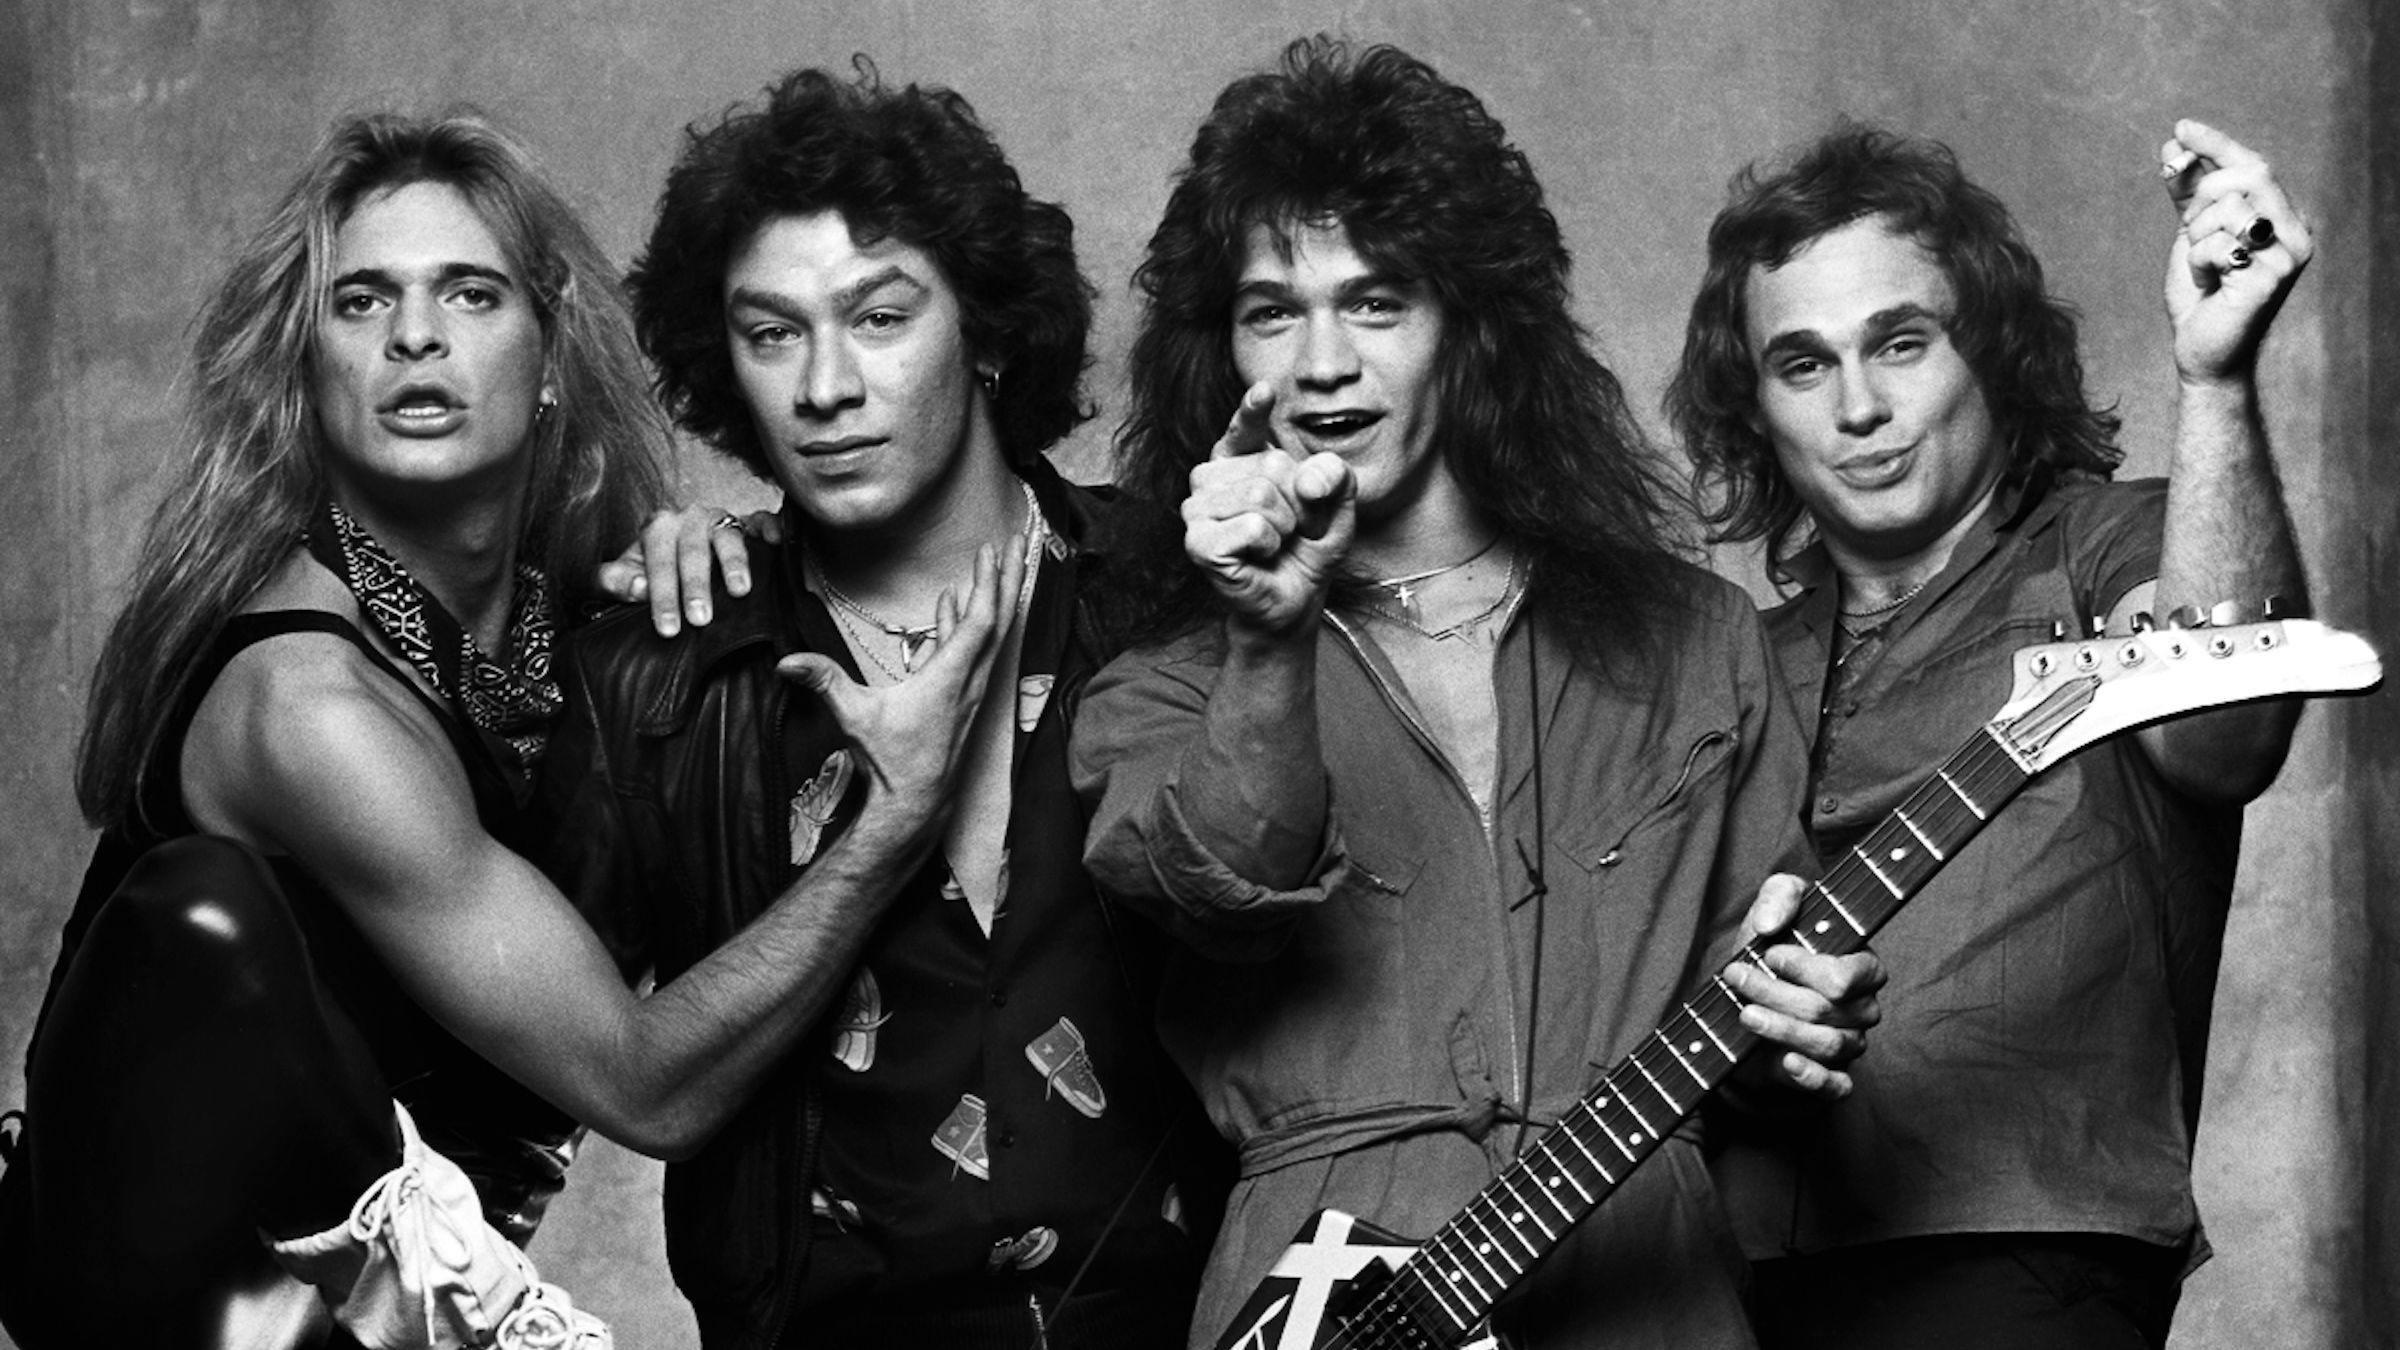 The Internet Is Freaking Out Over a Rumored Van Halen Reunion